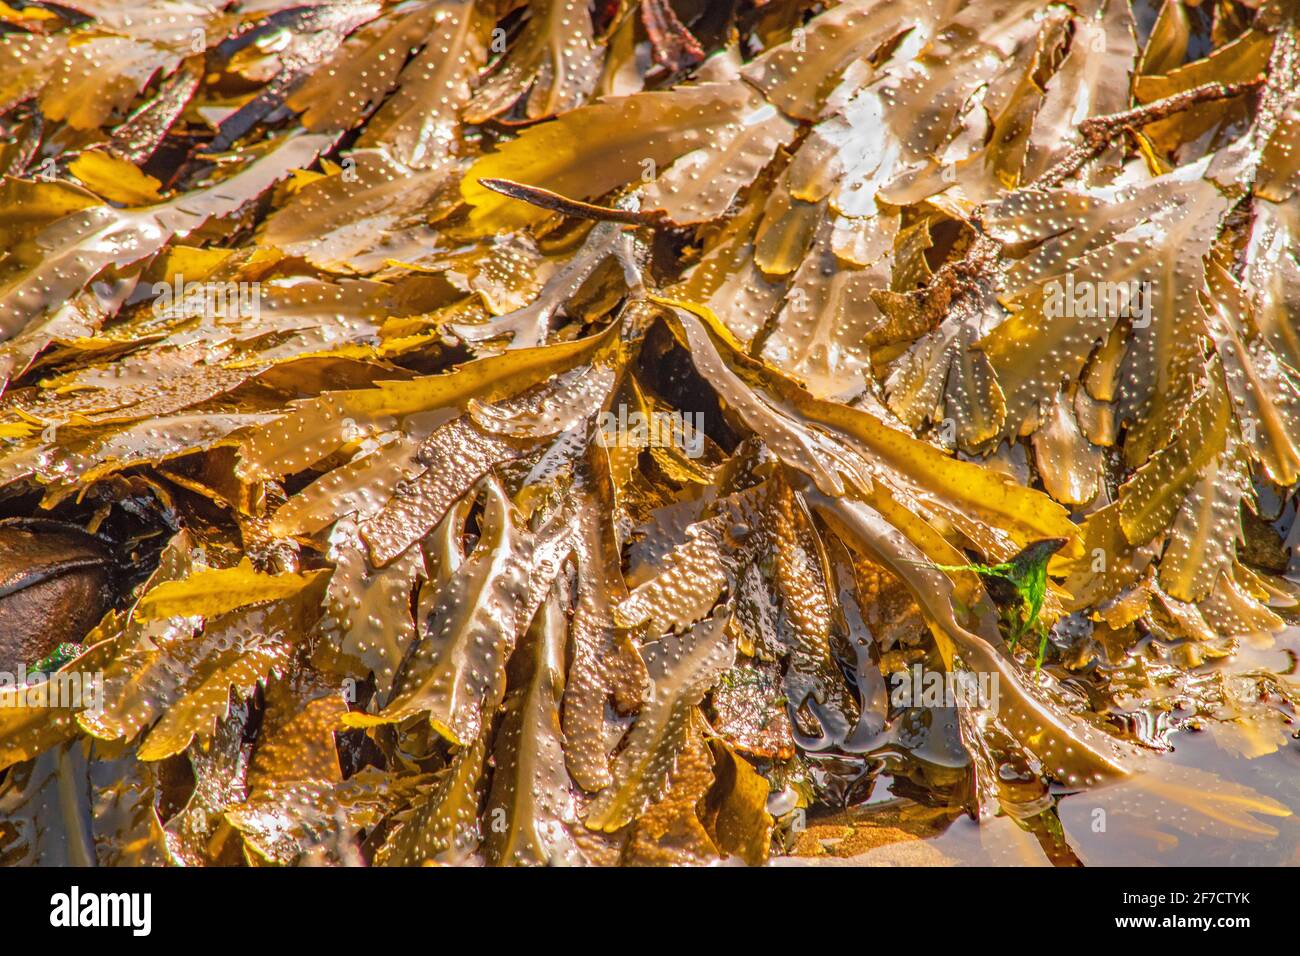 The yellowing drying serrated wrack seaweed by the tidal pool with ubbles of air pockets. Stock Photo